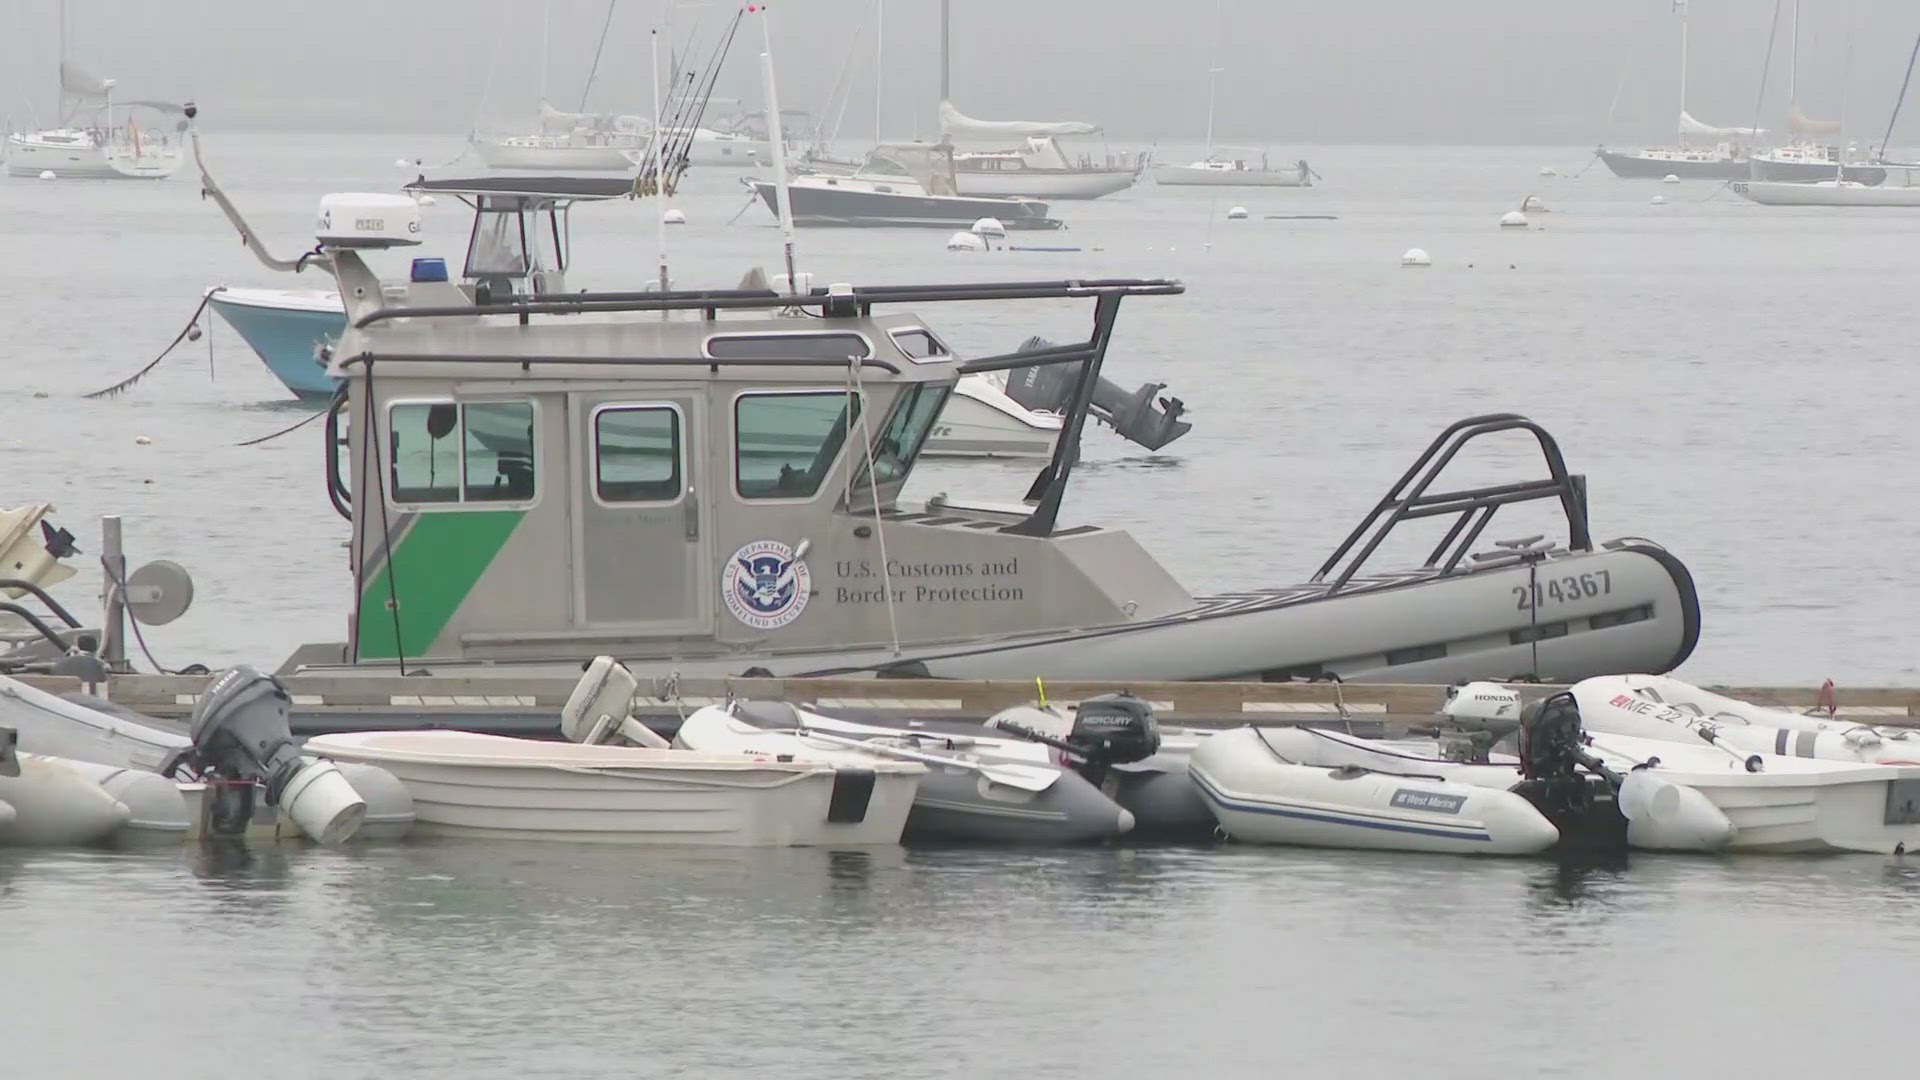 The Coast Guard suspended its search-and-rescue operation late Friday morning. Efforts now are focused on finding the body of the man from New Hampshire.